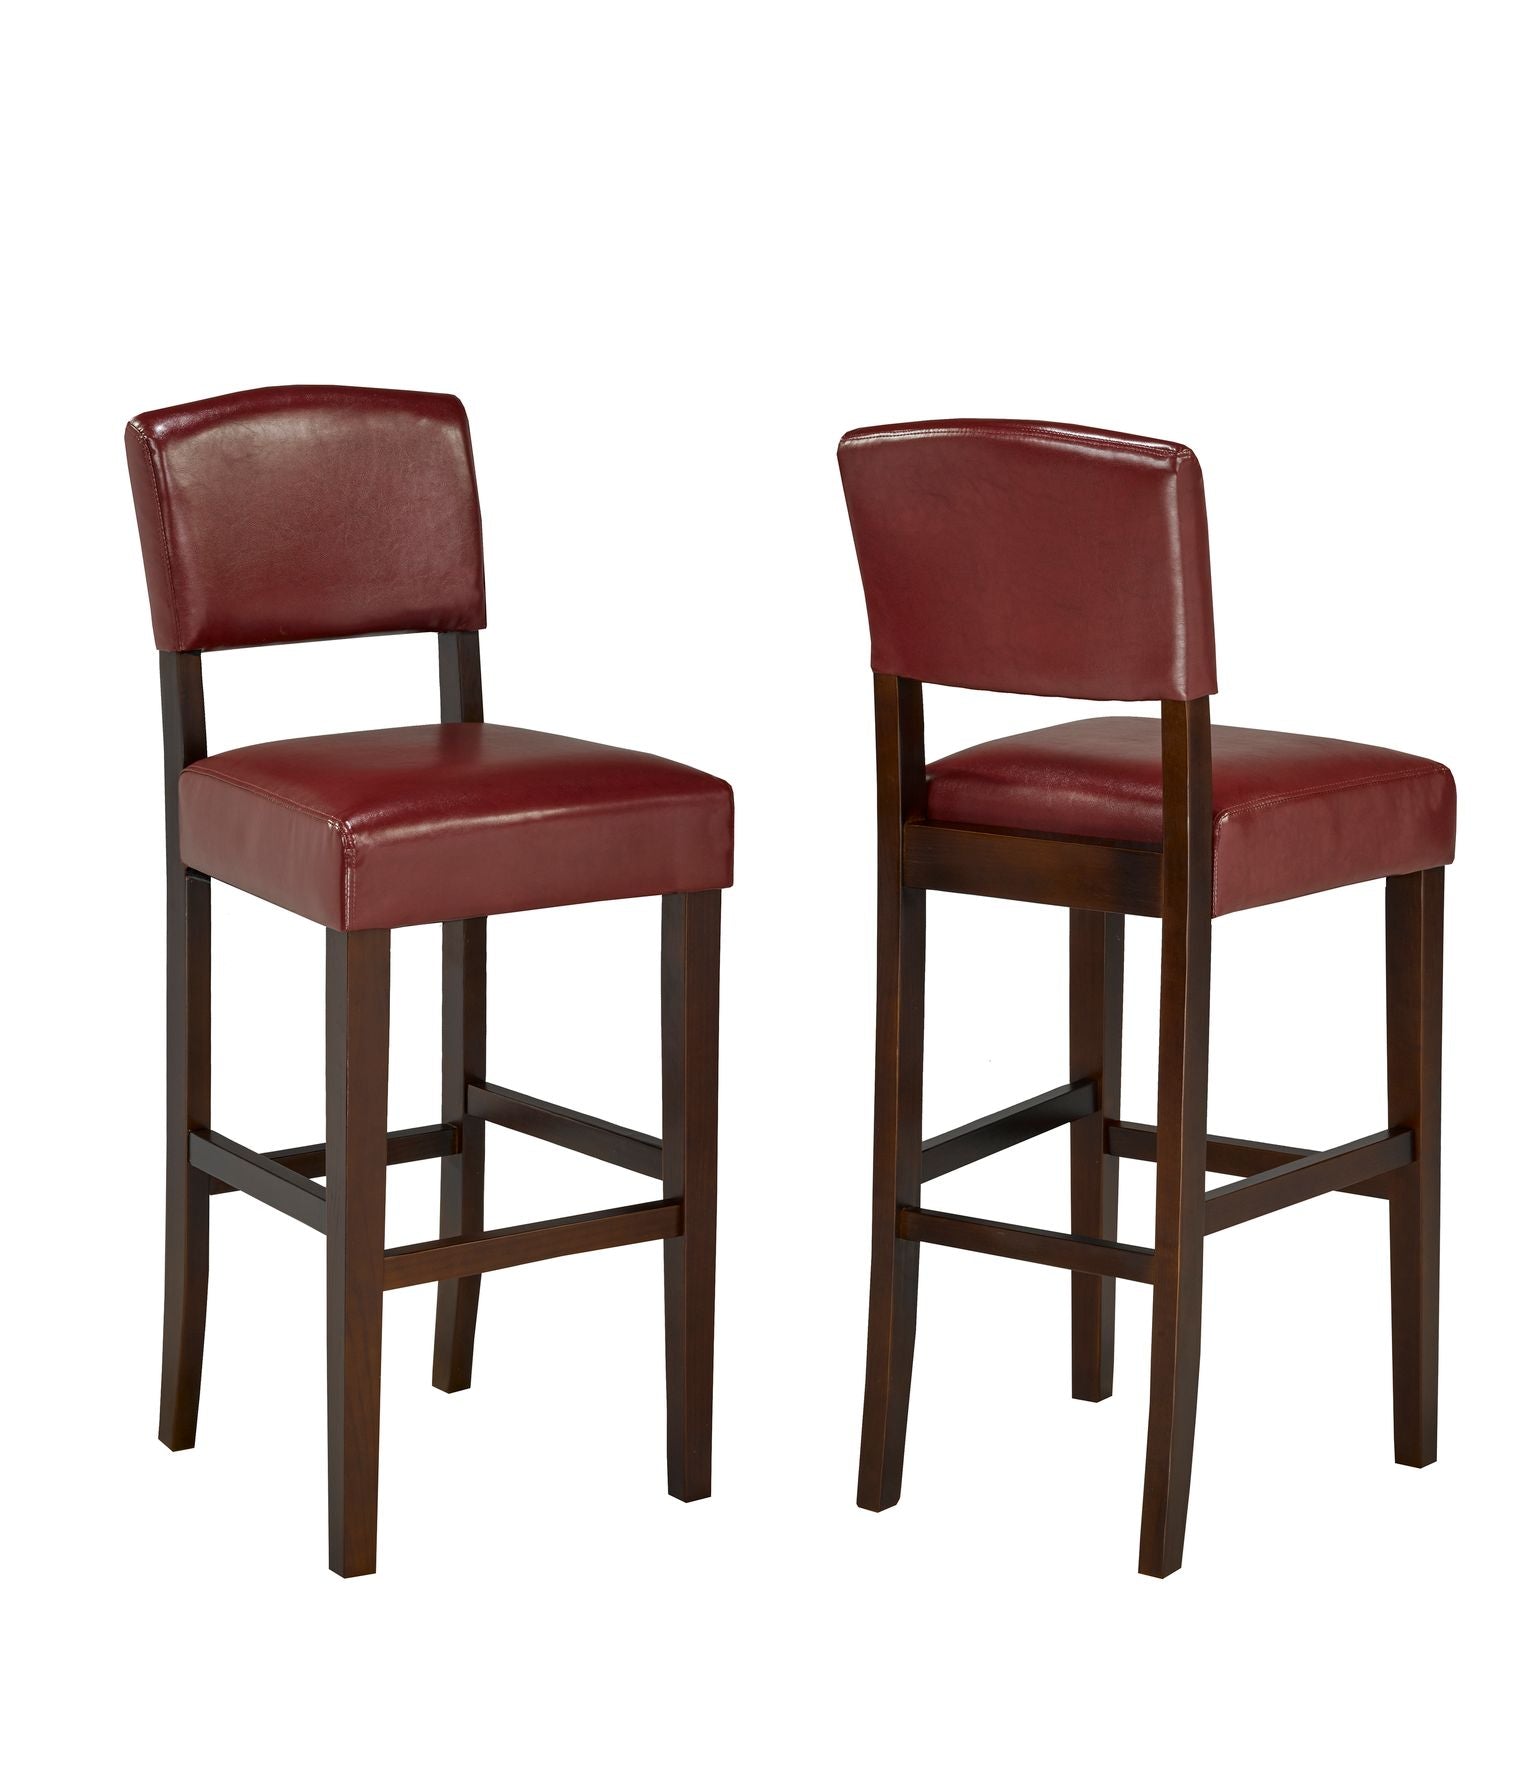 29' Red Bar Stool WS5422-29 RD